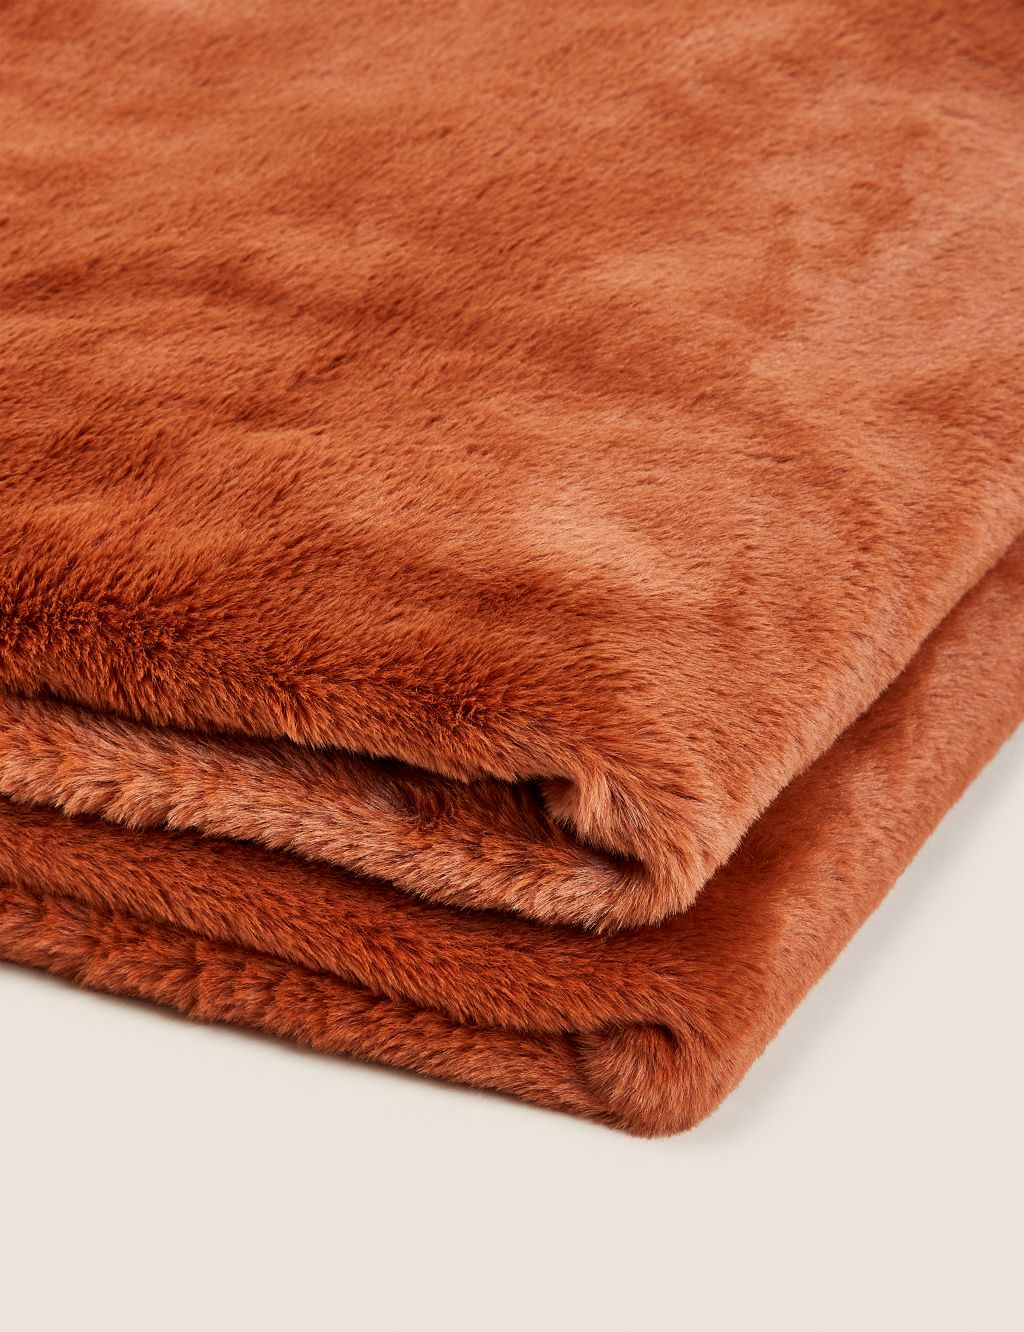 Supersoft Faux Fur Throw image 3